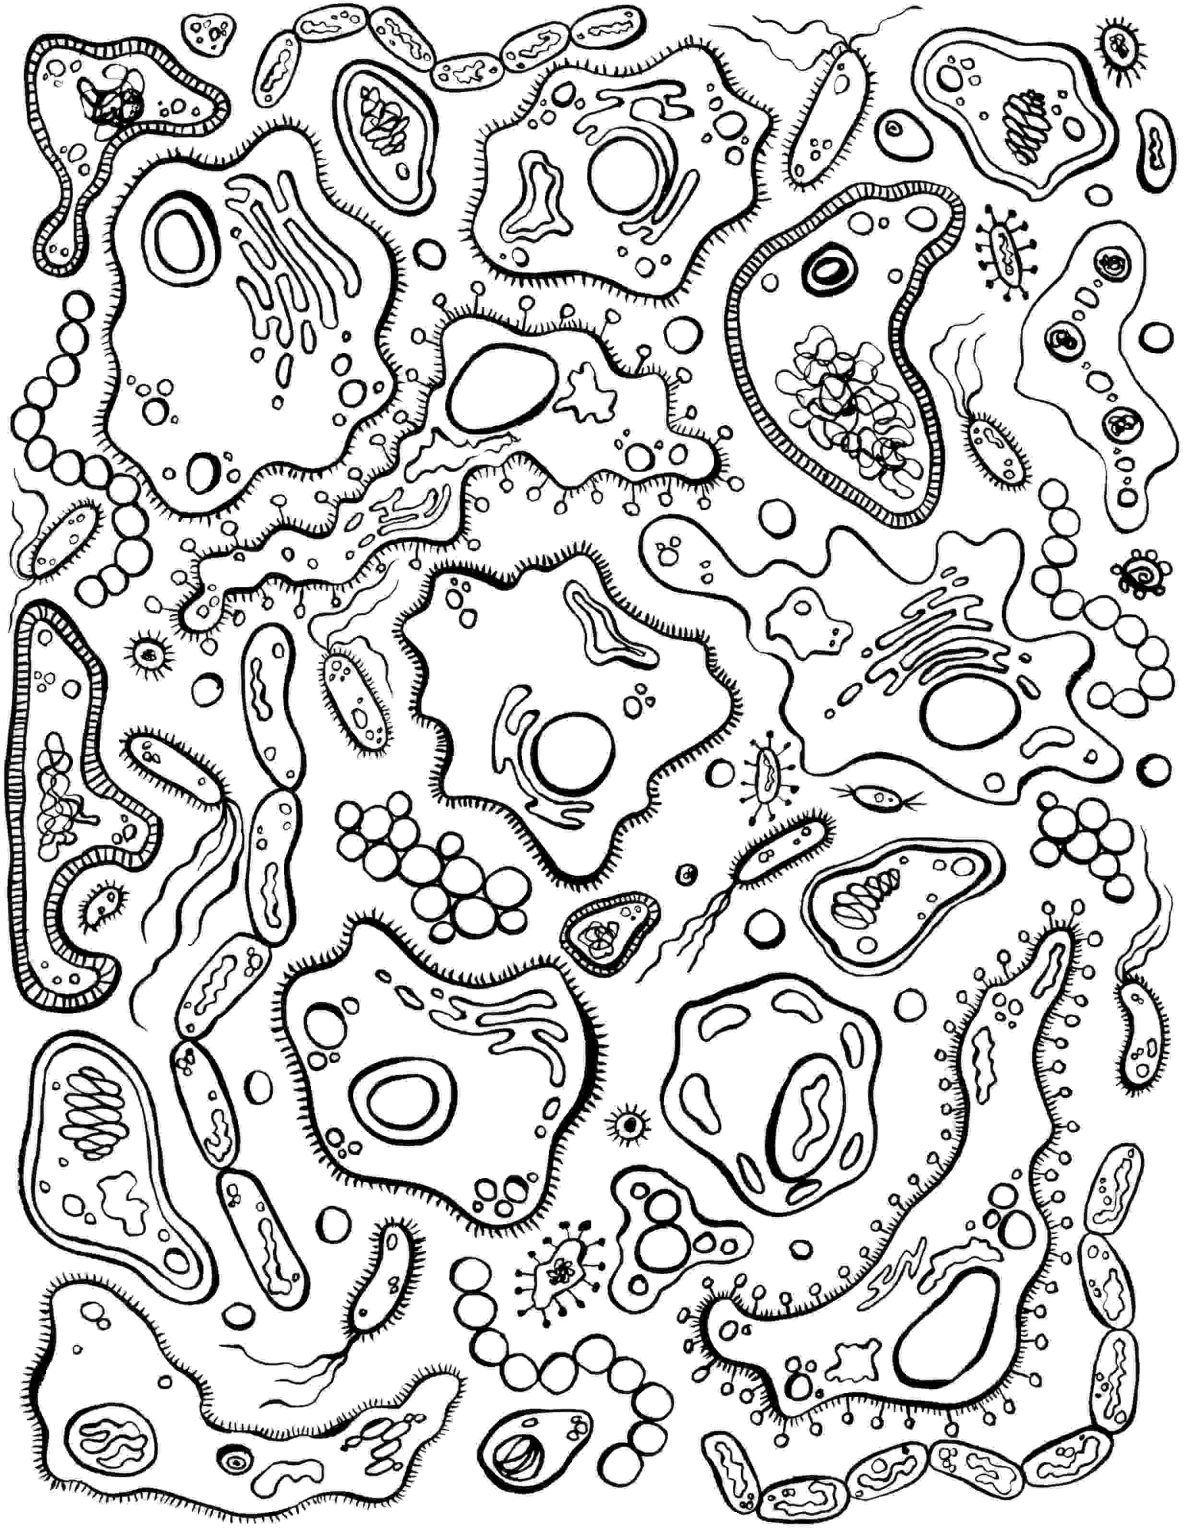 Printable Biology Coloring Pages Free For Kids And Adults